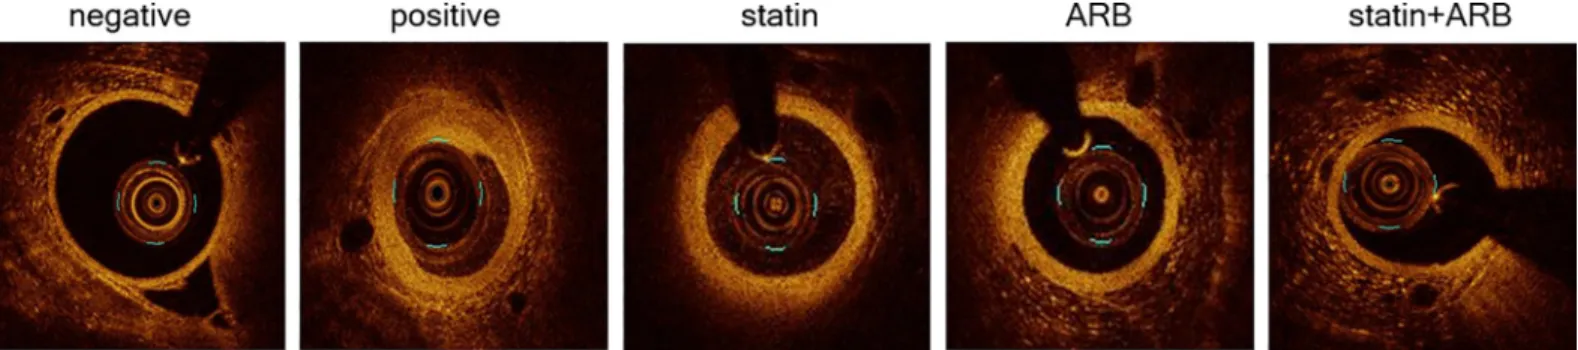 Fig 1. Images of optical coherence tomography (OCT). OCT images are shown for each group